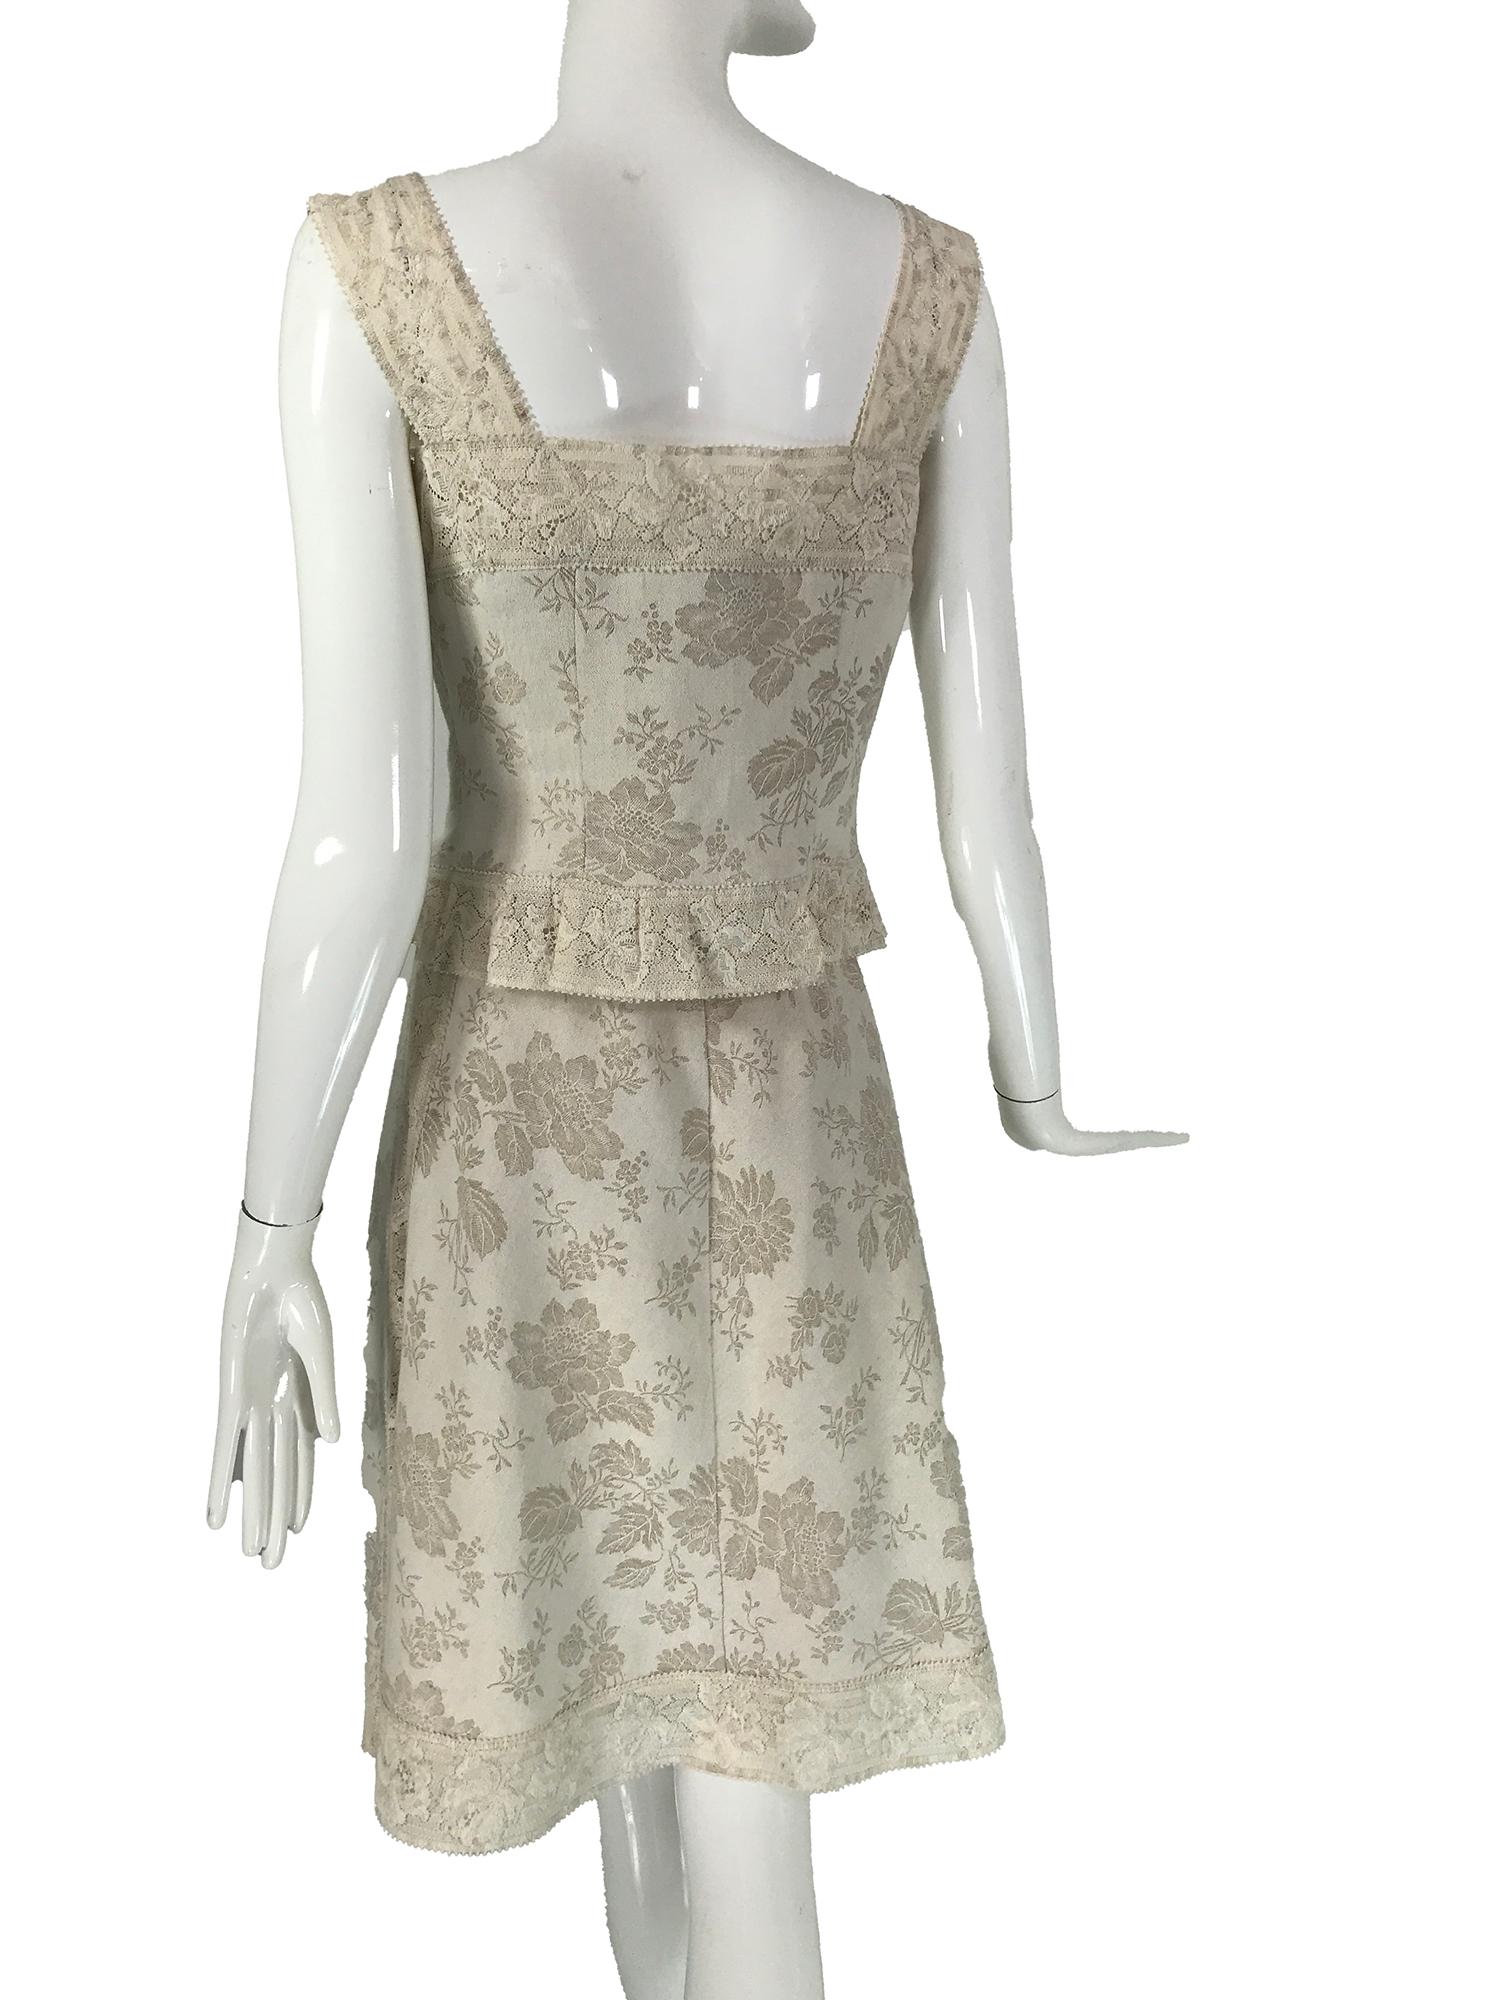 Women's Valentino Boutique Ivory Floral Damask Linen & Lace Camisole Top & Skirt 1980s